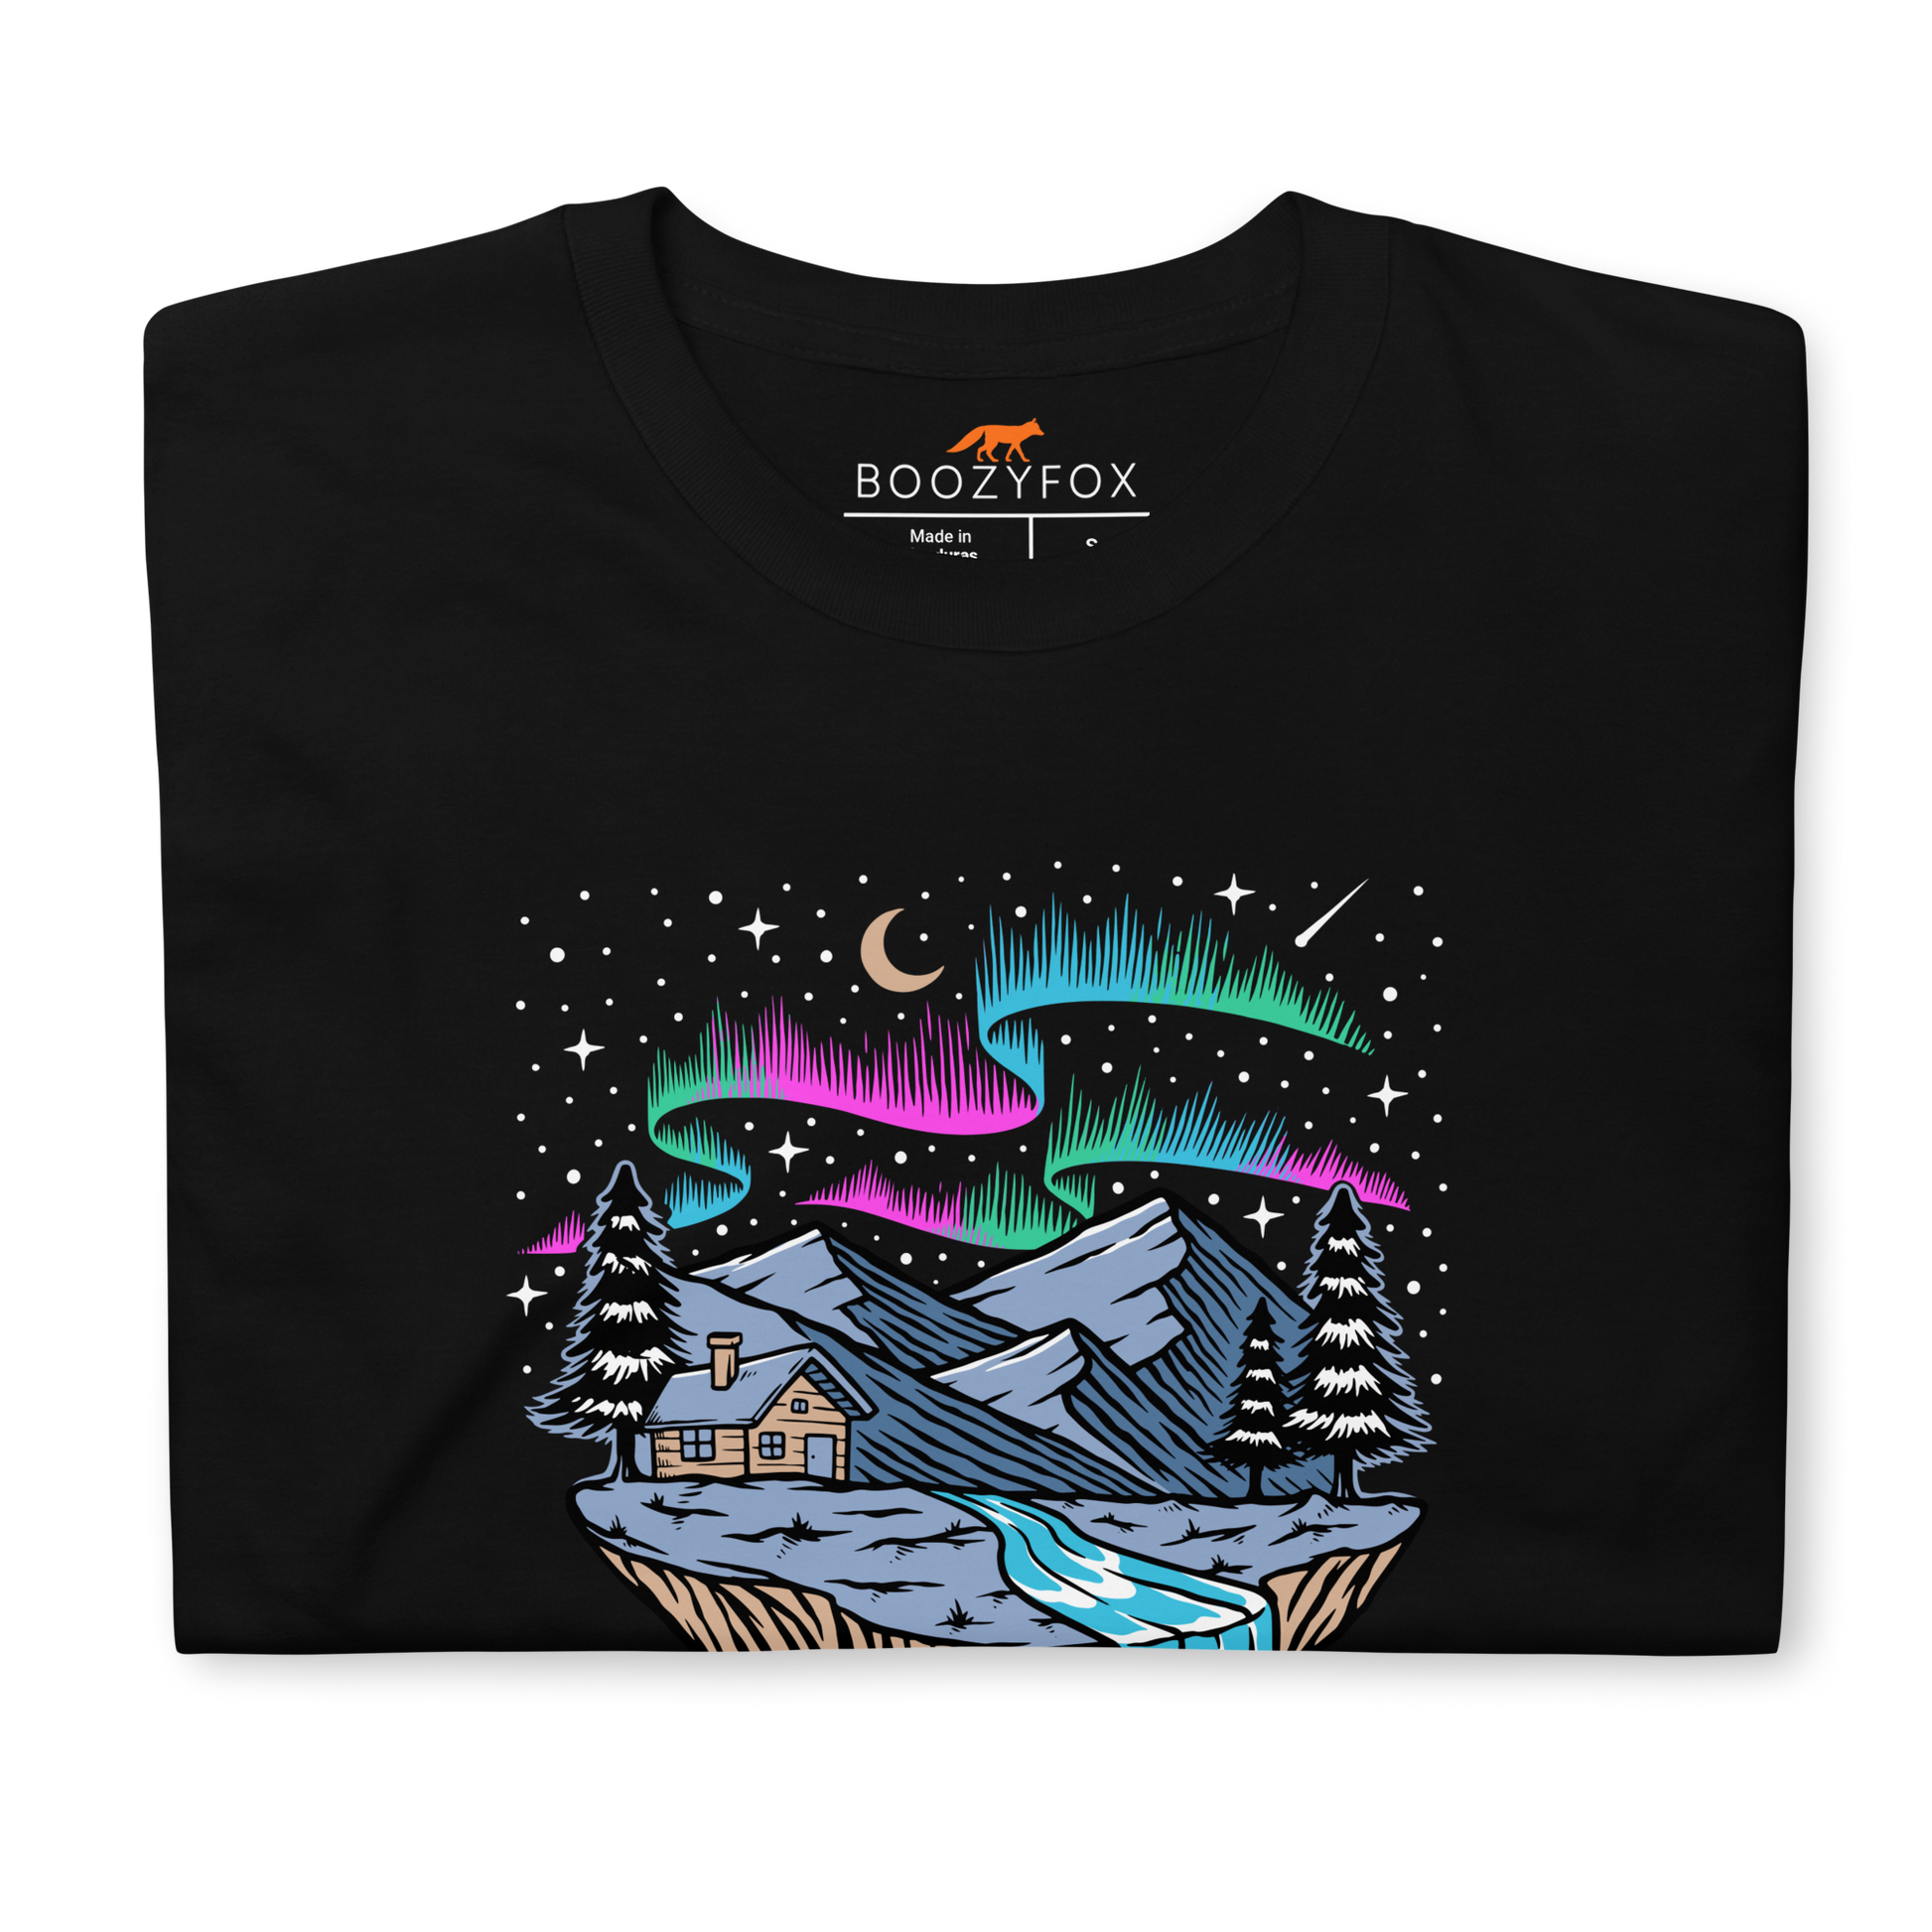 Front details of a Black Let's Get Lost T-Shirt featuring a mesmerizing night sky, adorned with stars and aurora borealis graphic on the chest - Cool Graphic Northern Lights T-Shirts - Boozy Fox